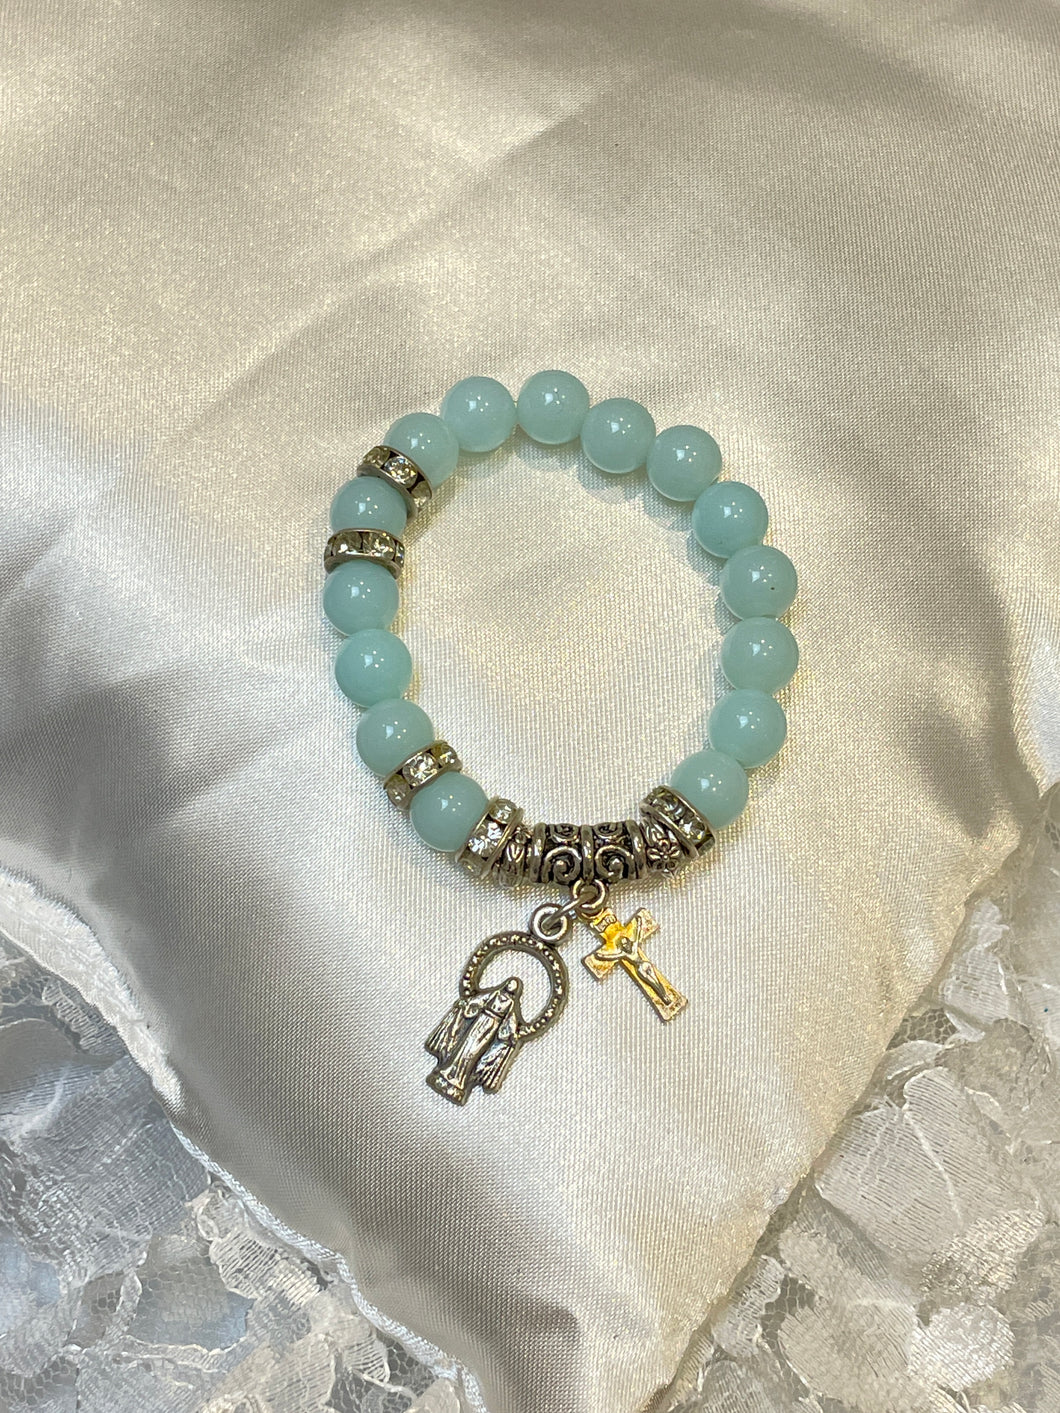 Light Blue Gemstone Rosary Bracelet with Our Lady of Grace and Crucifix Charms